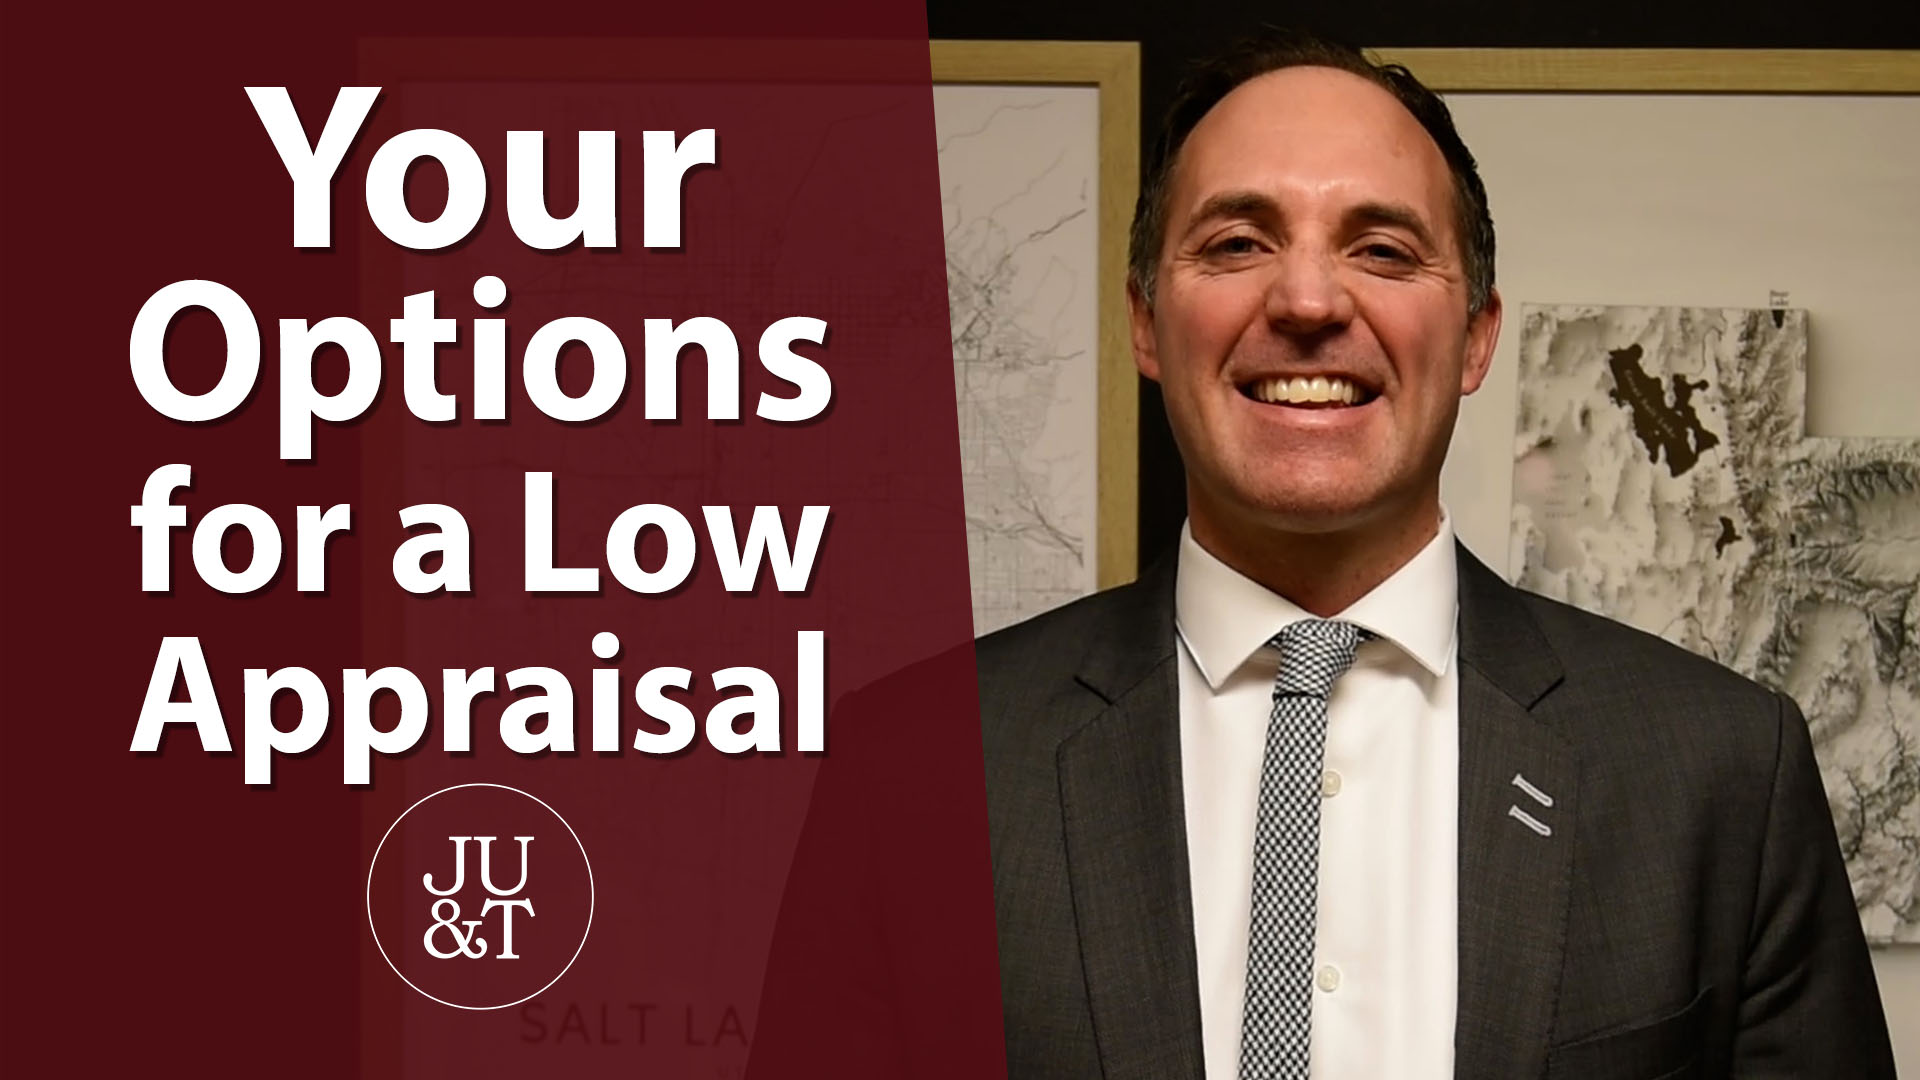 What to Do About a Low Appraisal